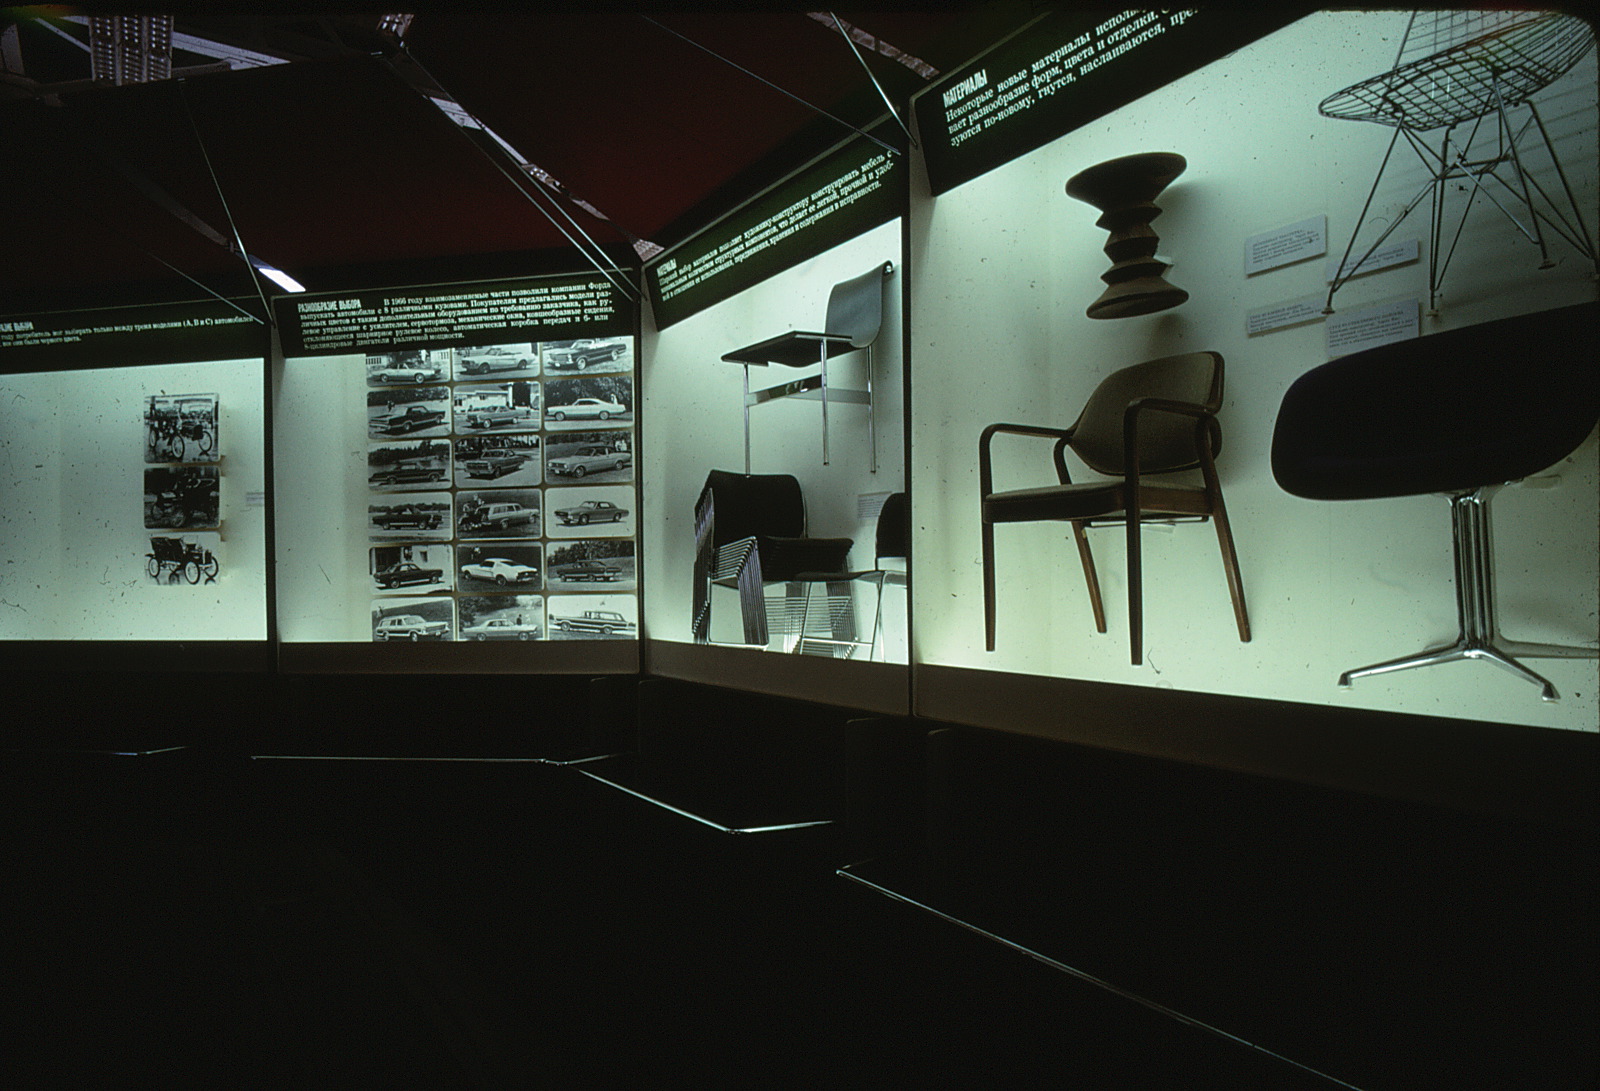 Display cases featuring household furniture.